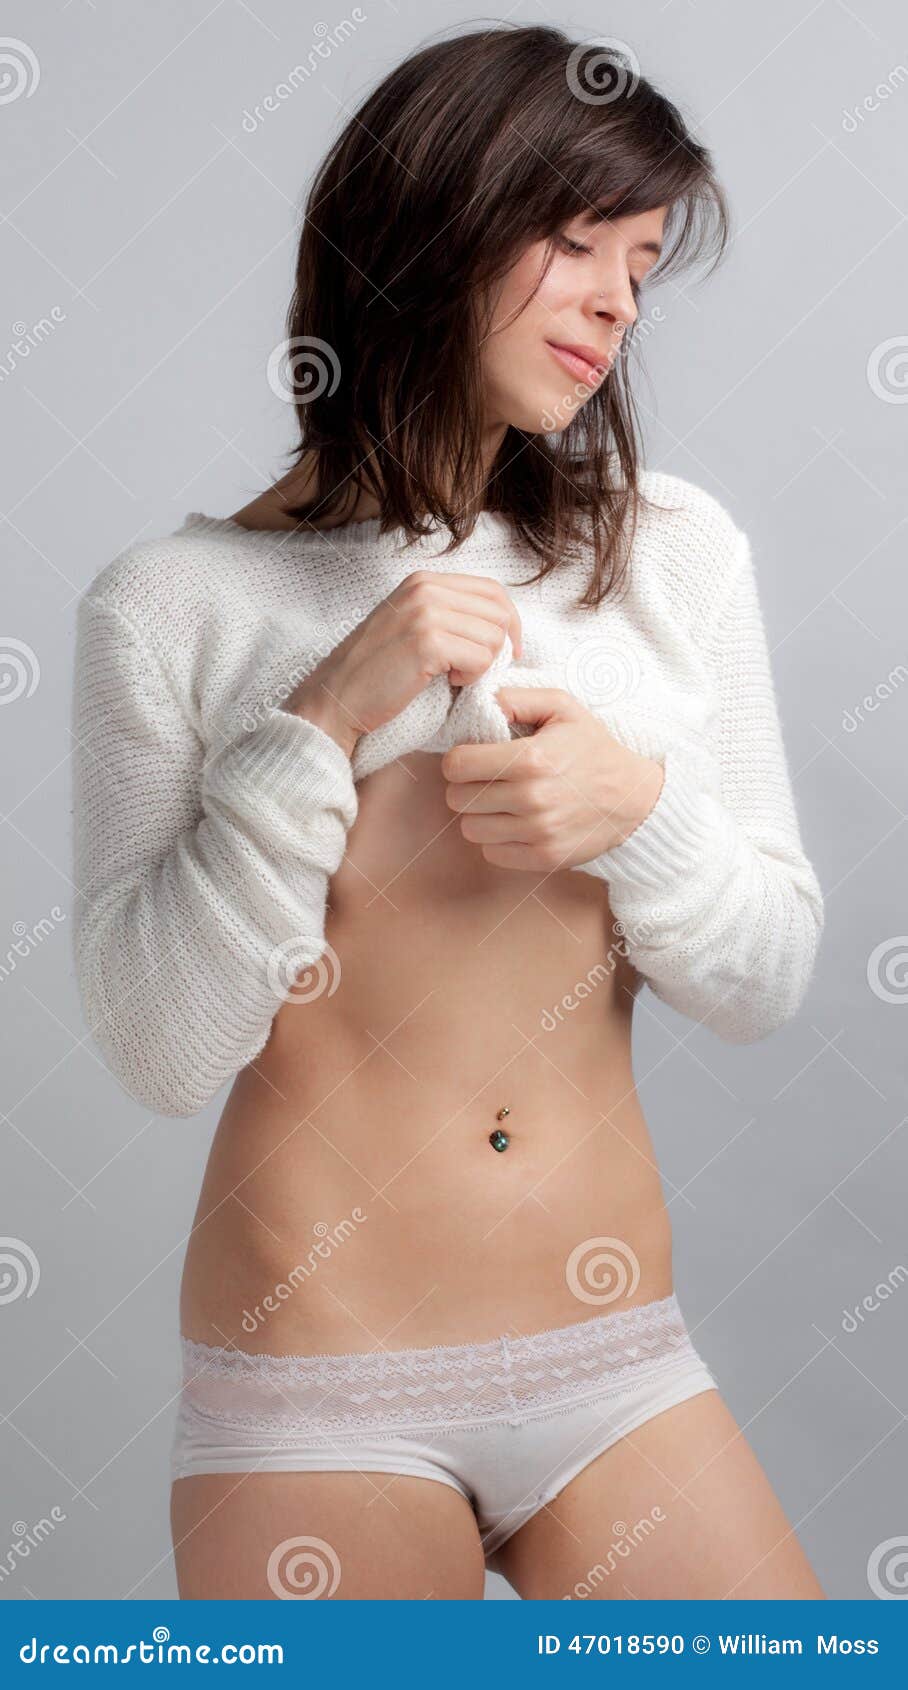 https://thumbs.dreamstime.com/z/cute-woman-sweater-panties-portrait-pretty-playing-her-smiling-47018590.jpg